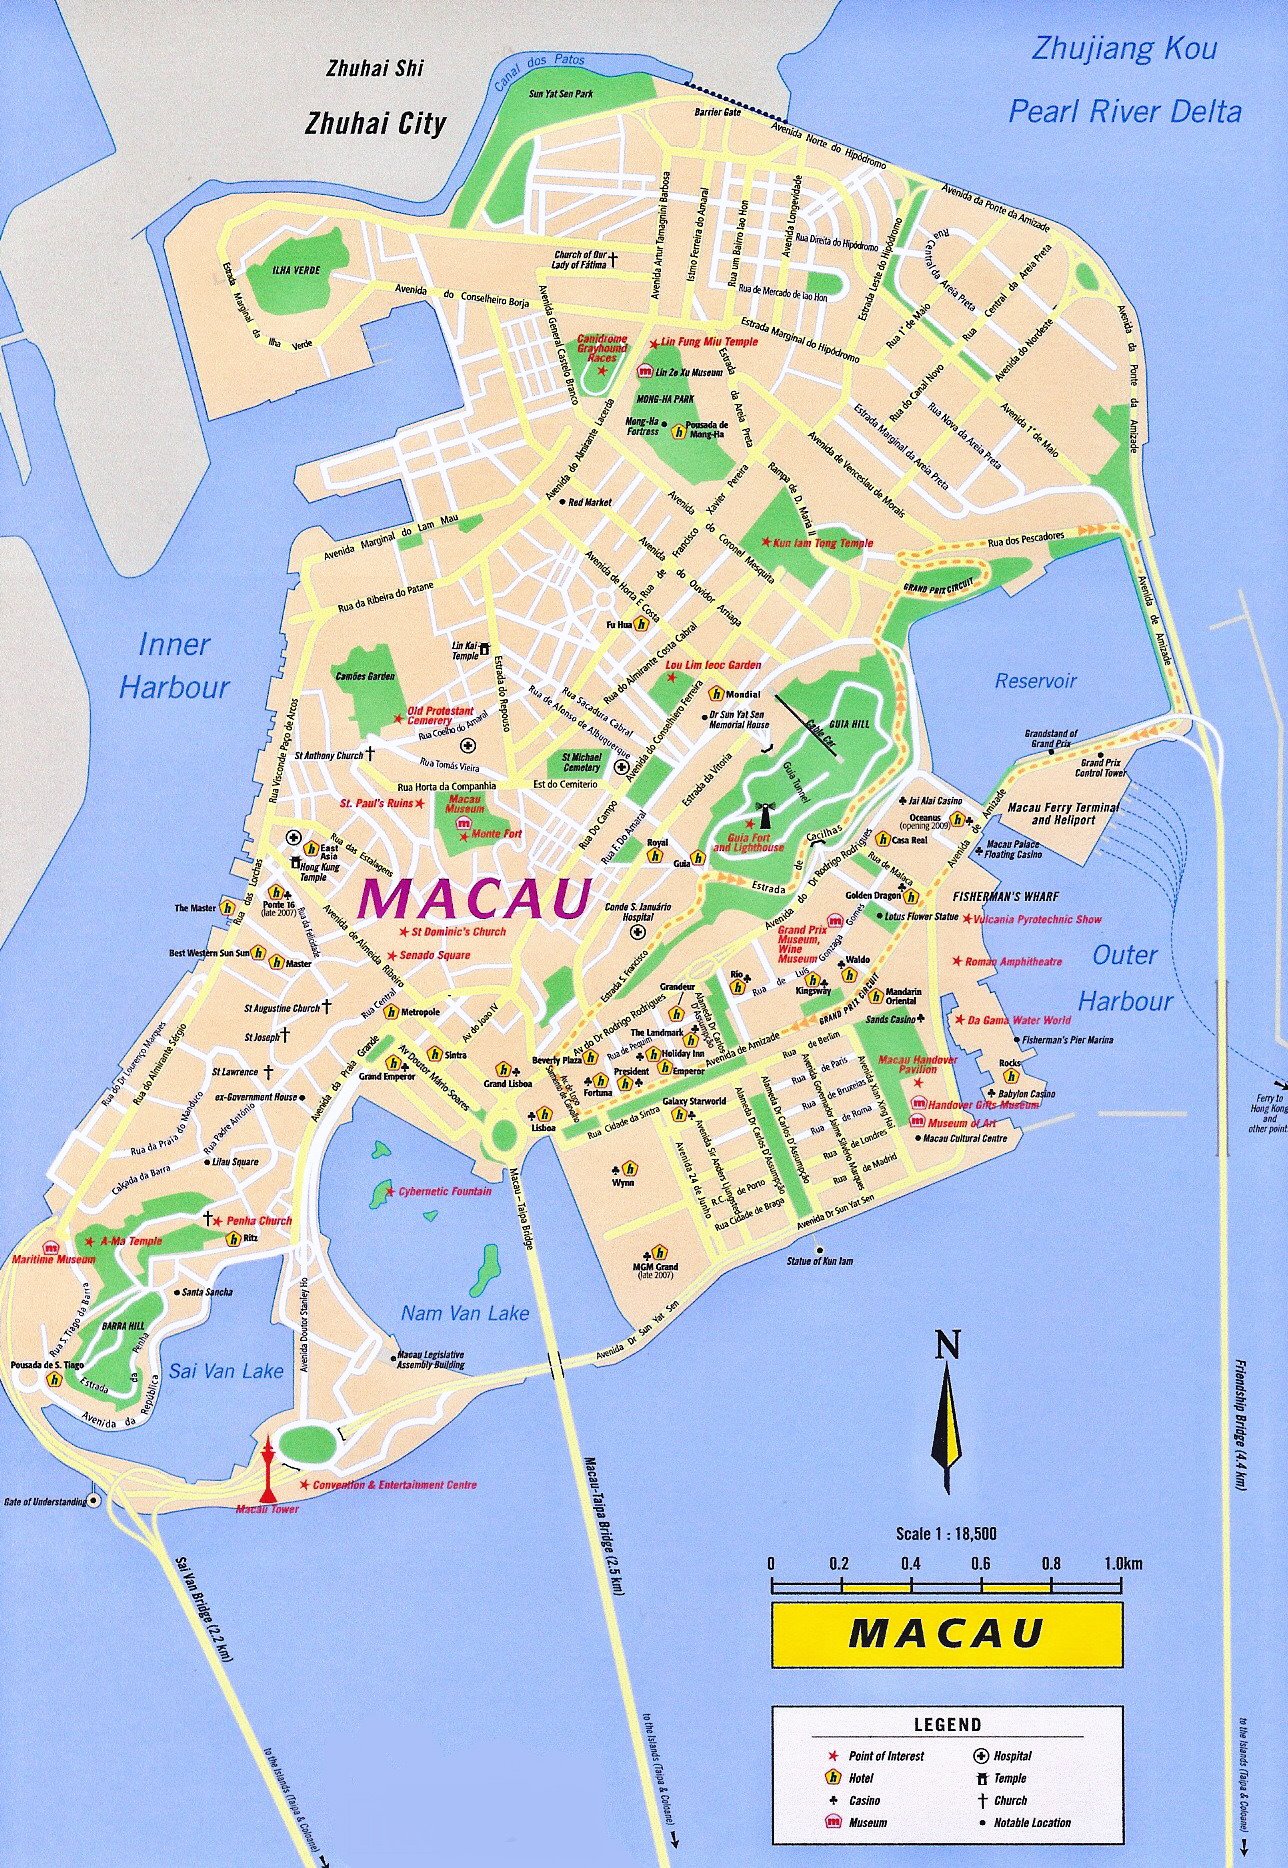 Macau Tourist Map Macau Map With Tourist Attractions 2022 | Images and ...